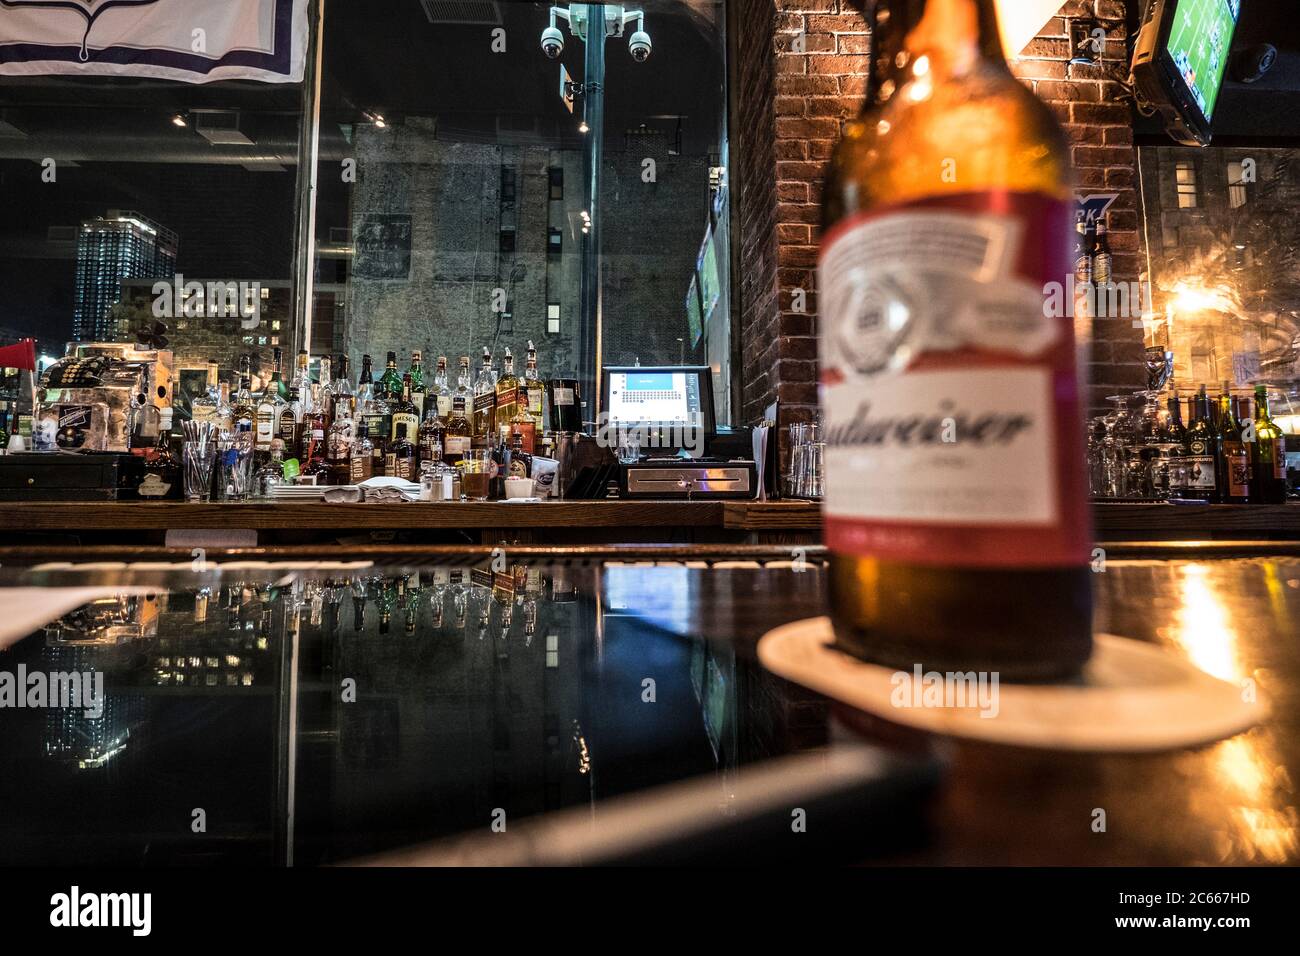 beer bottle on the counter of a bar Stock Photo